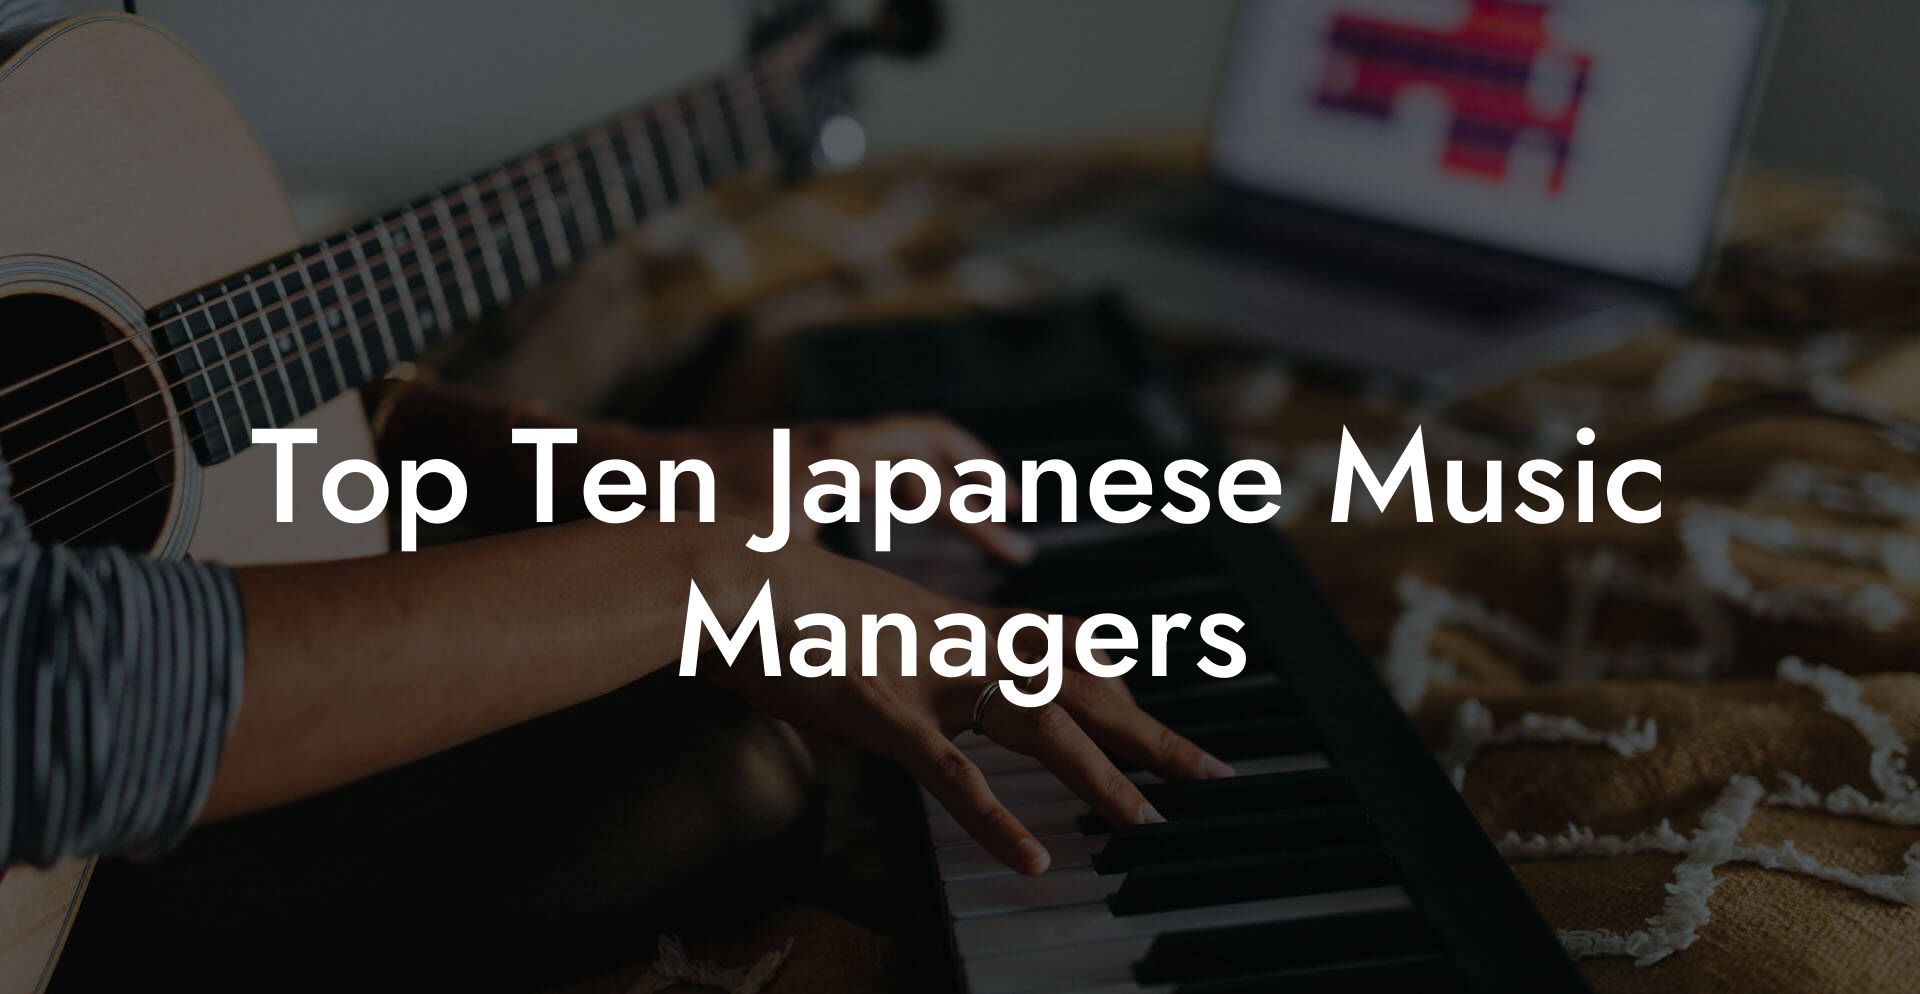 Top Ten Japanese Music Managers